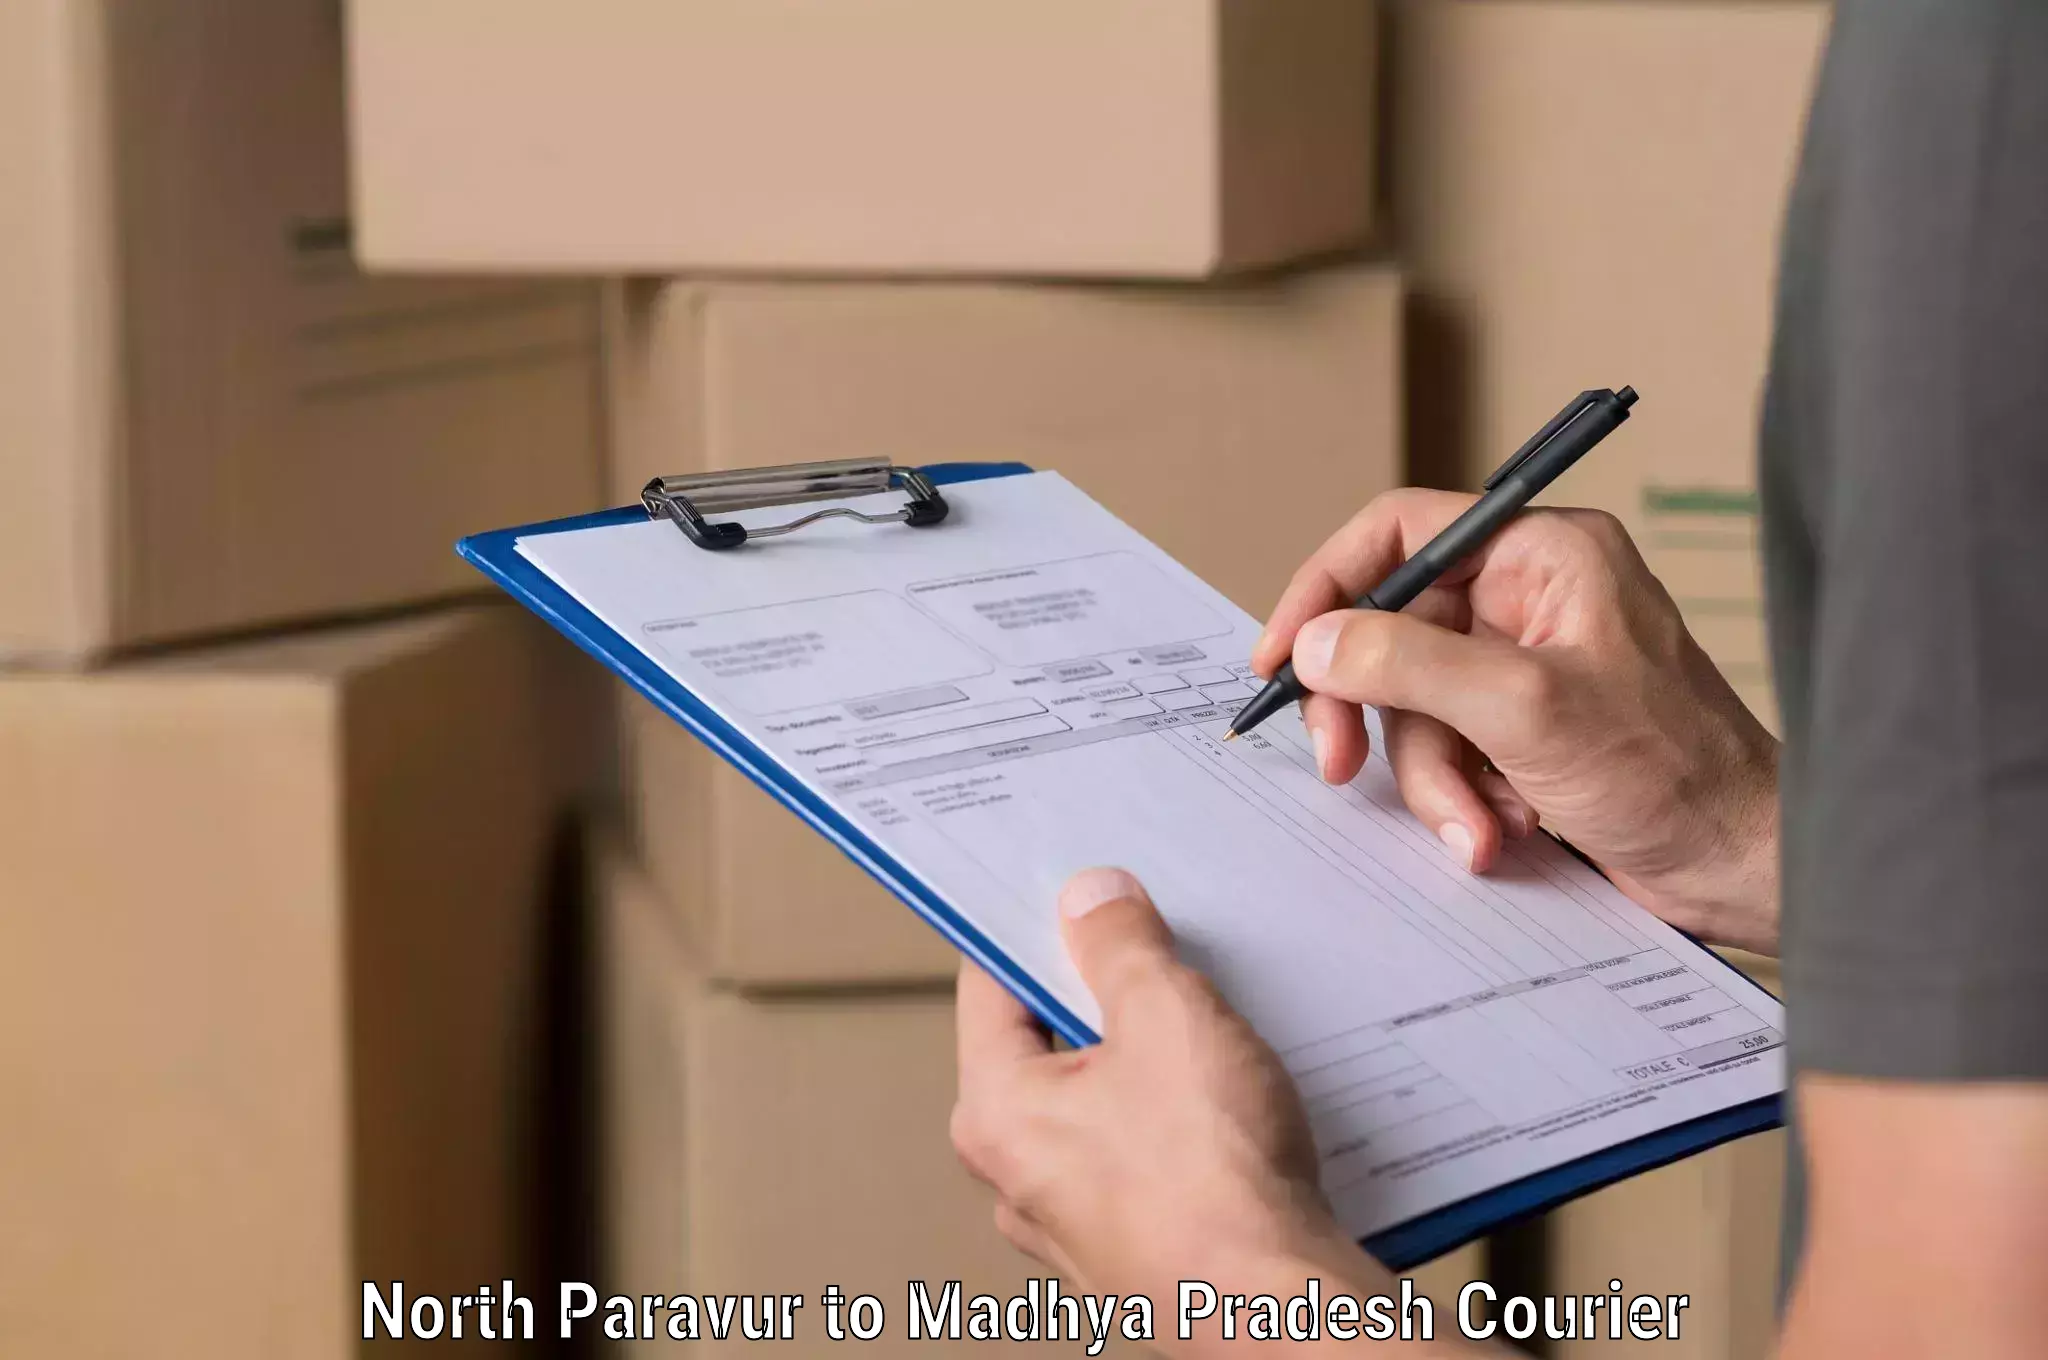 Courier service innovation North Paravur to Sanawad